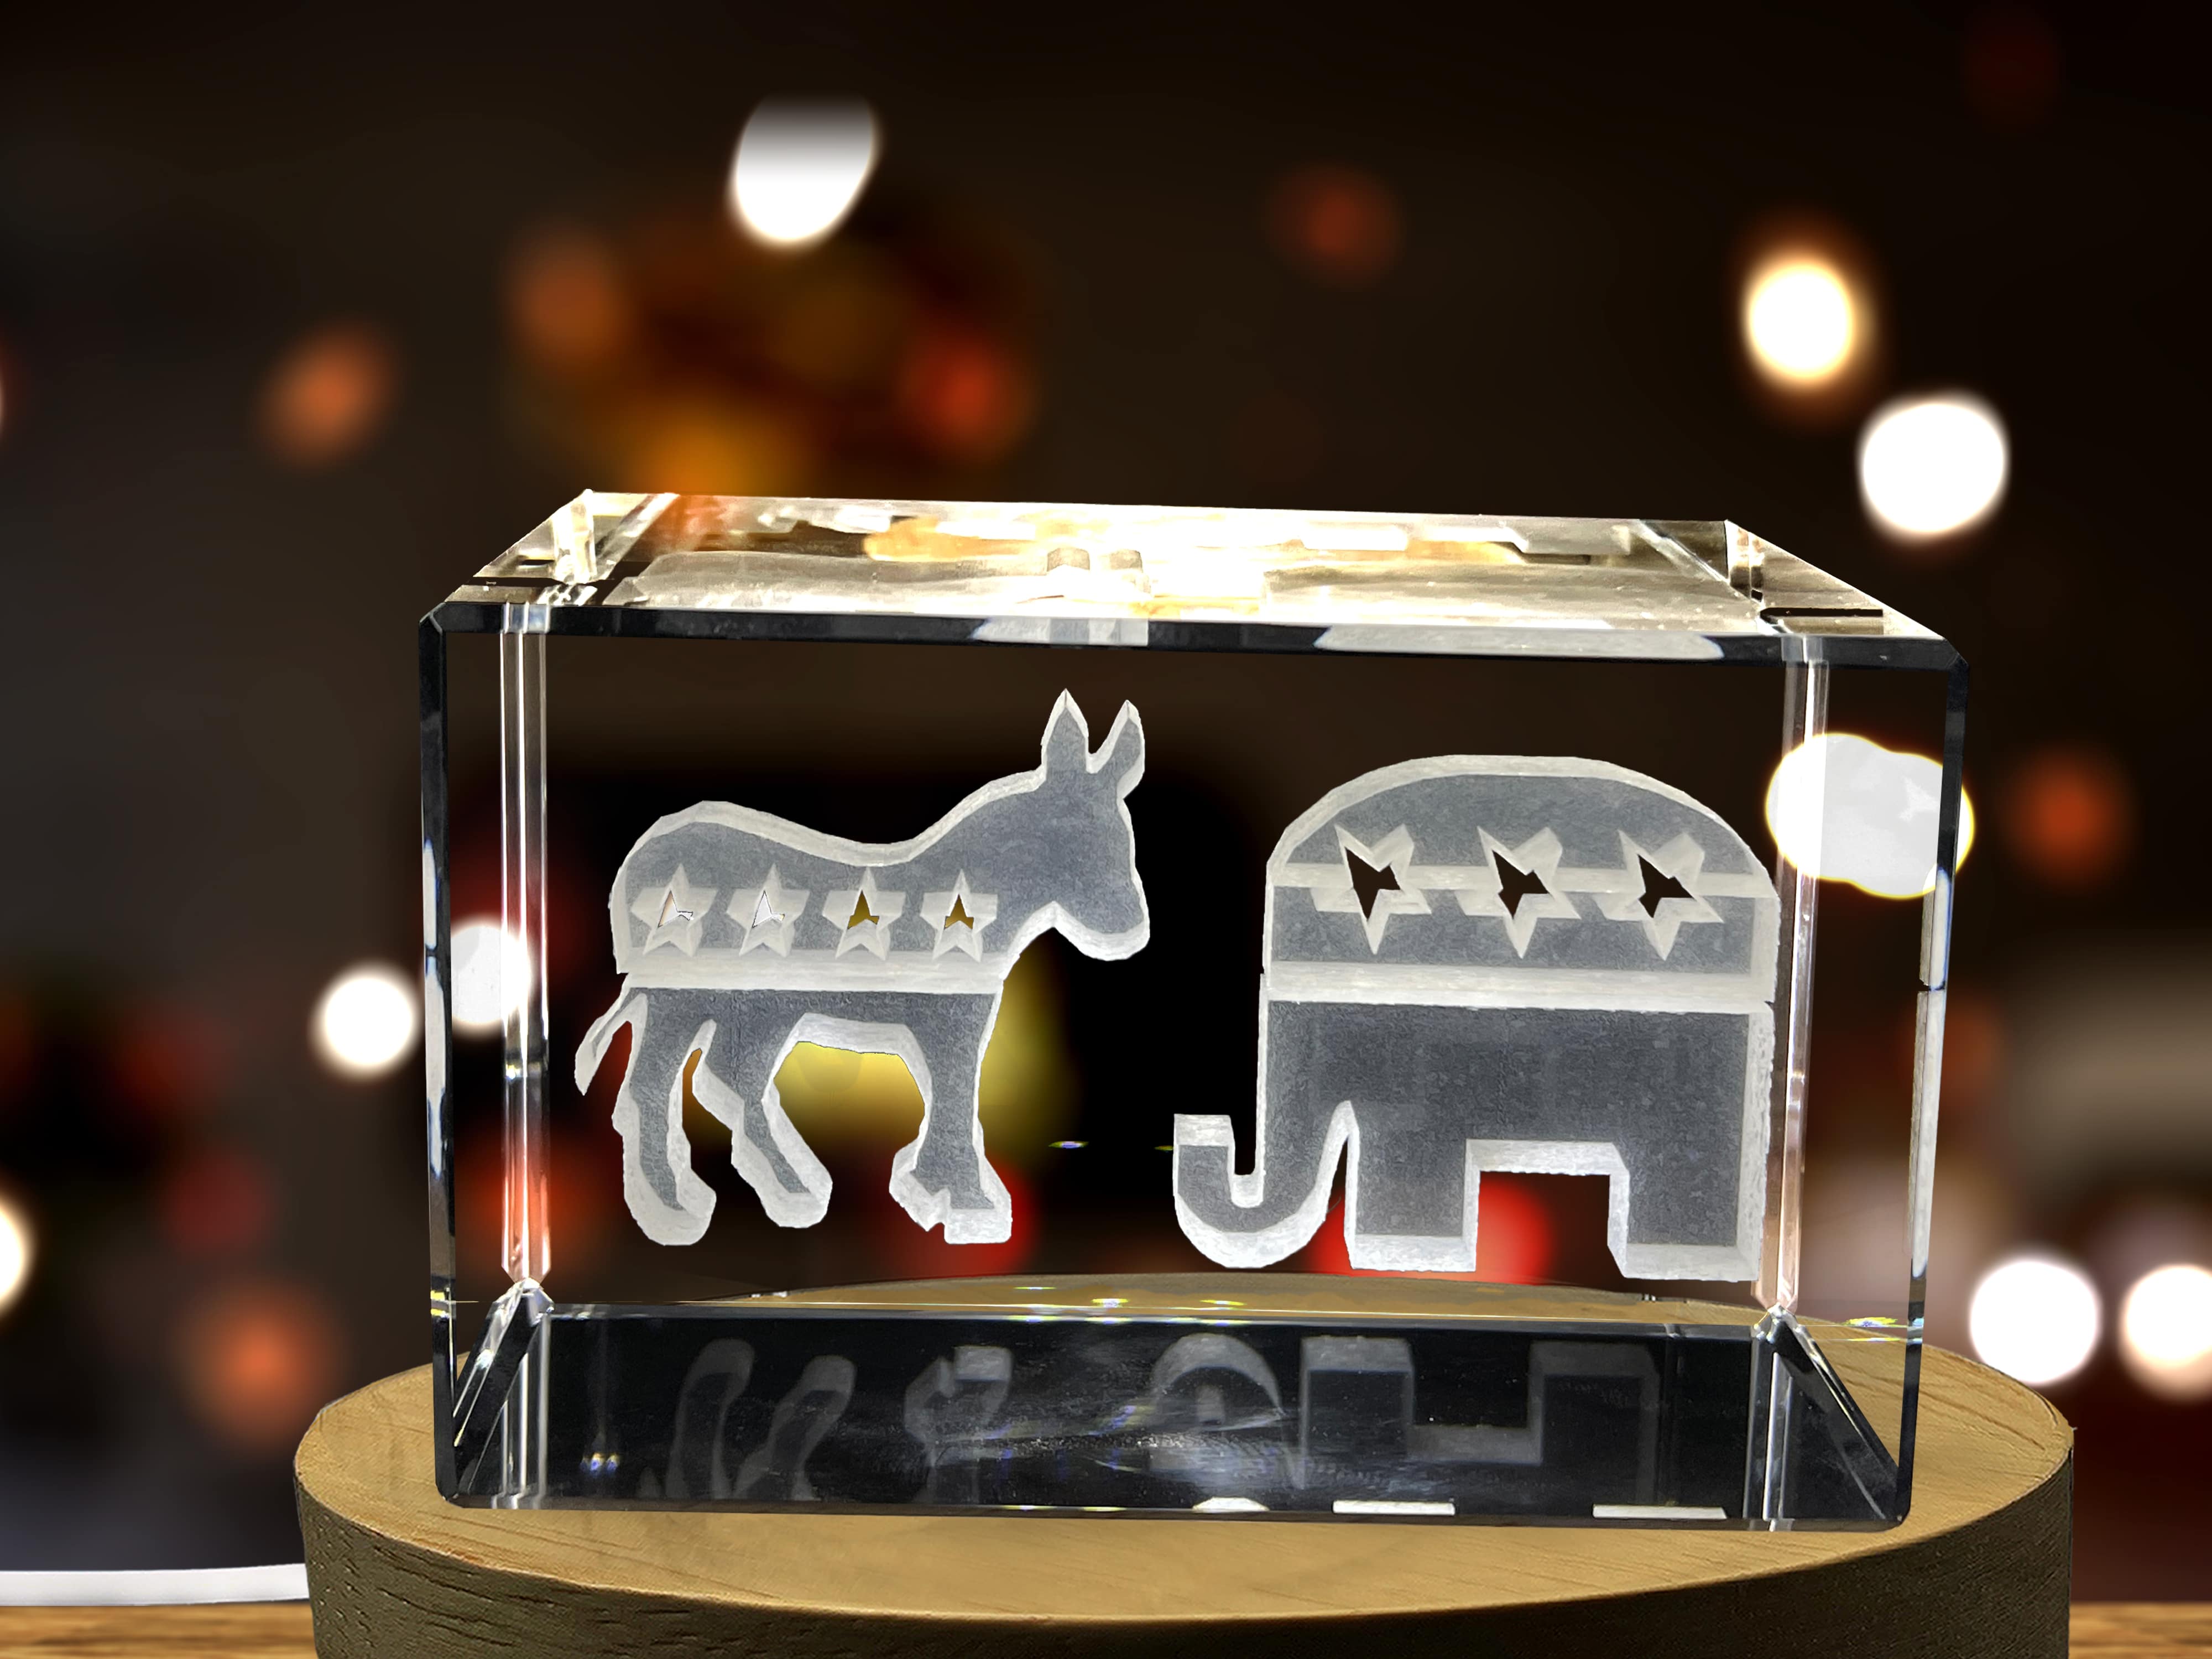 Political Animals Subsurface Engraved Crystal Novelty Decor A&B Crystal Collection